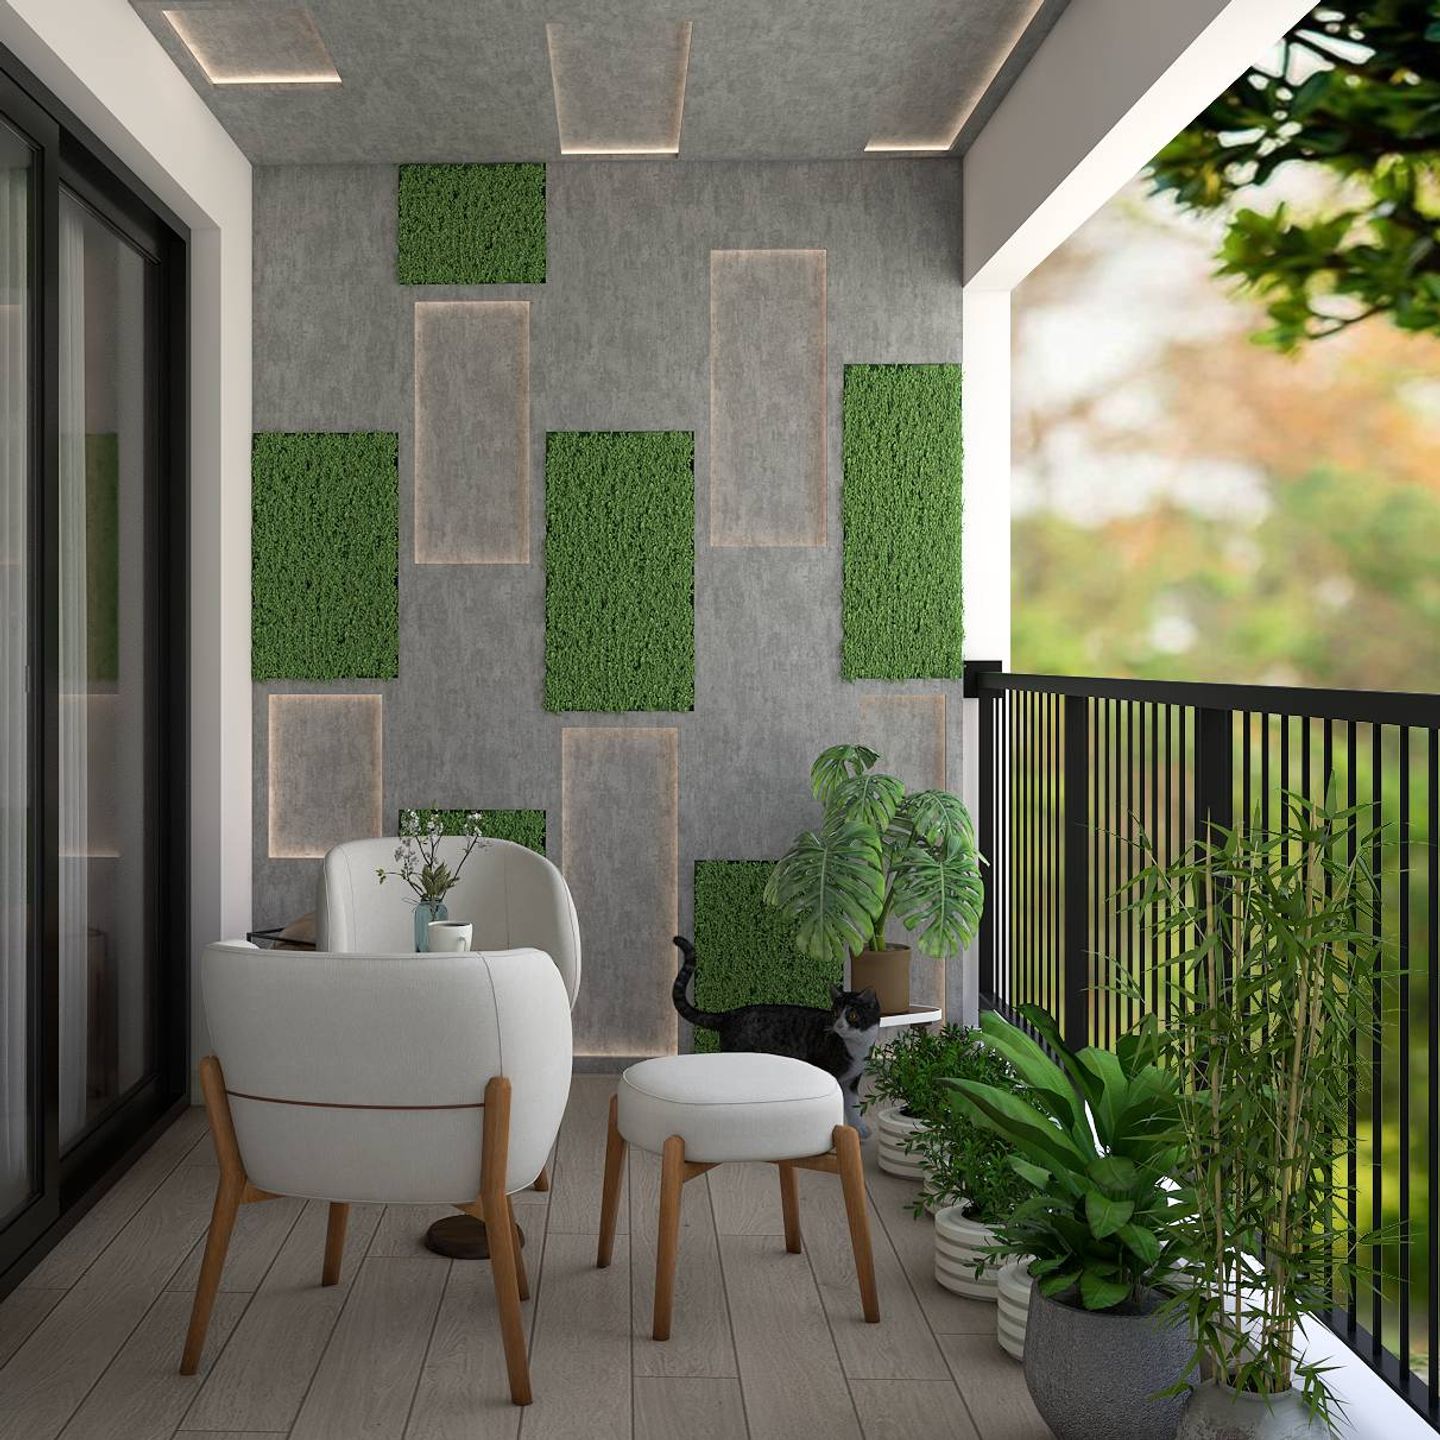 Balcony Design With Grey Textured Wall And Grass Panelling - Livspace